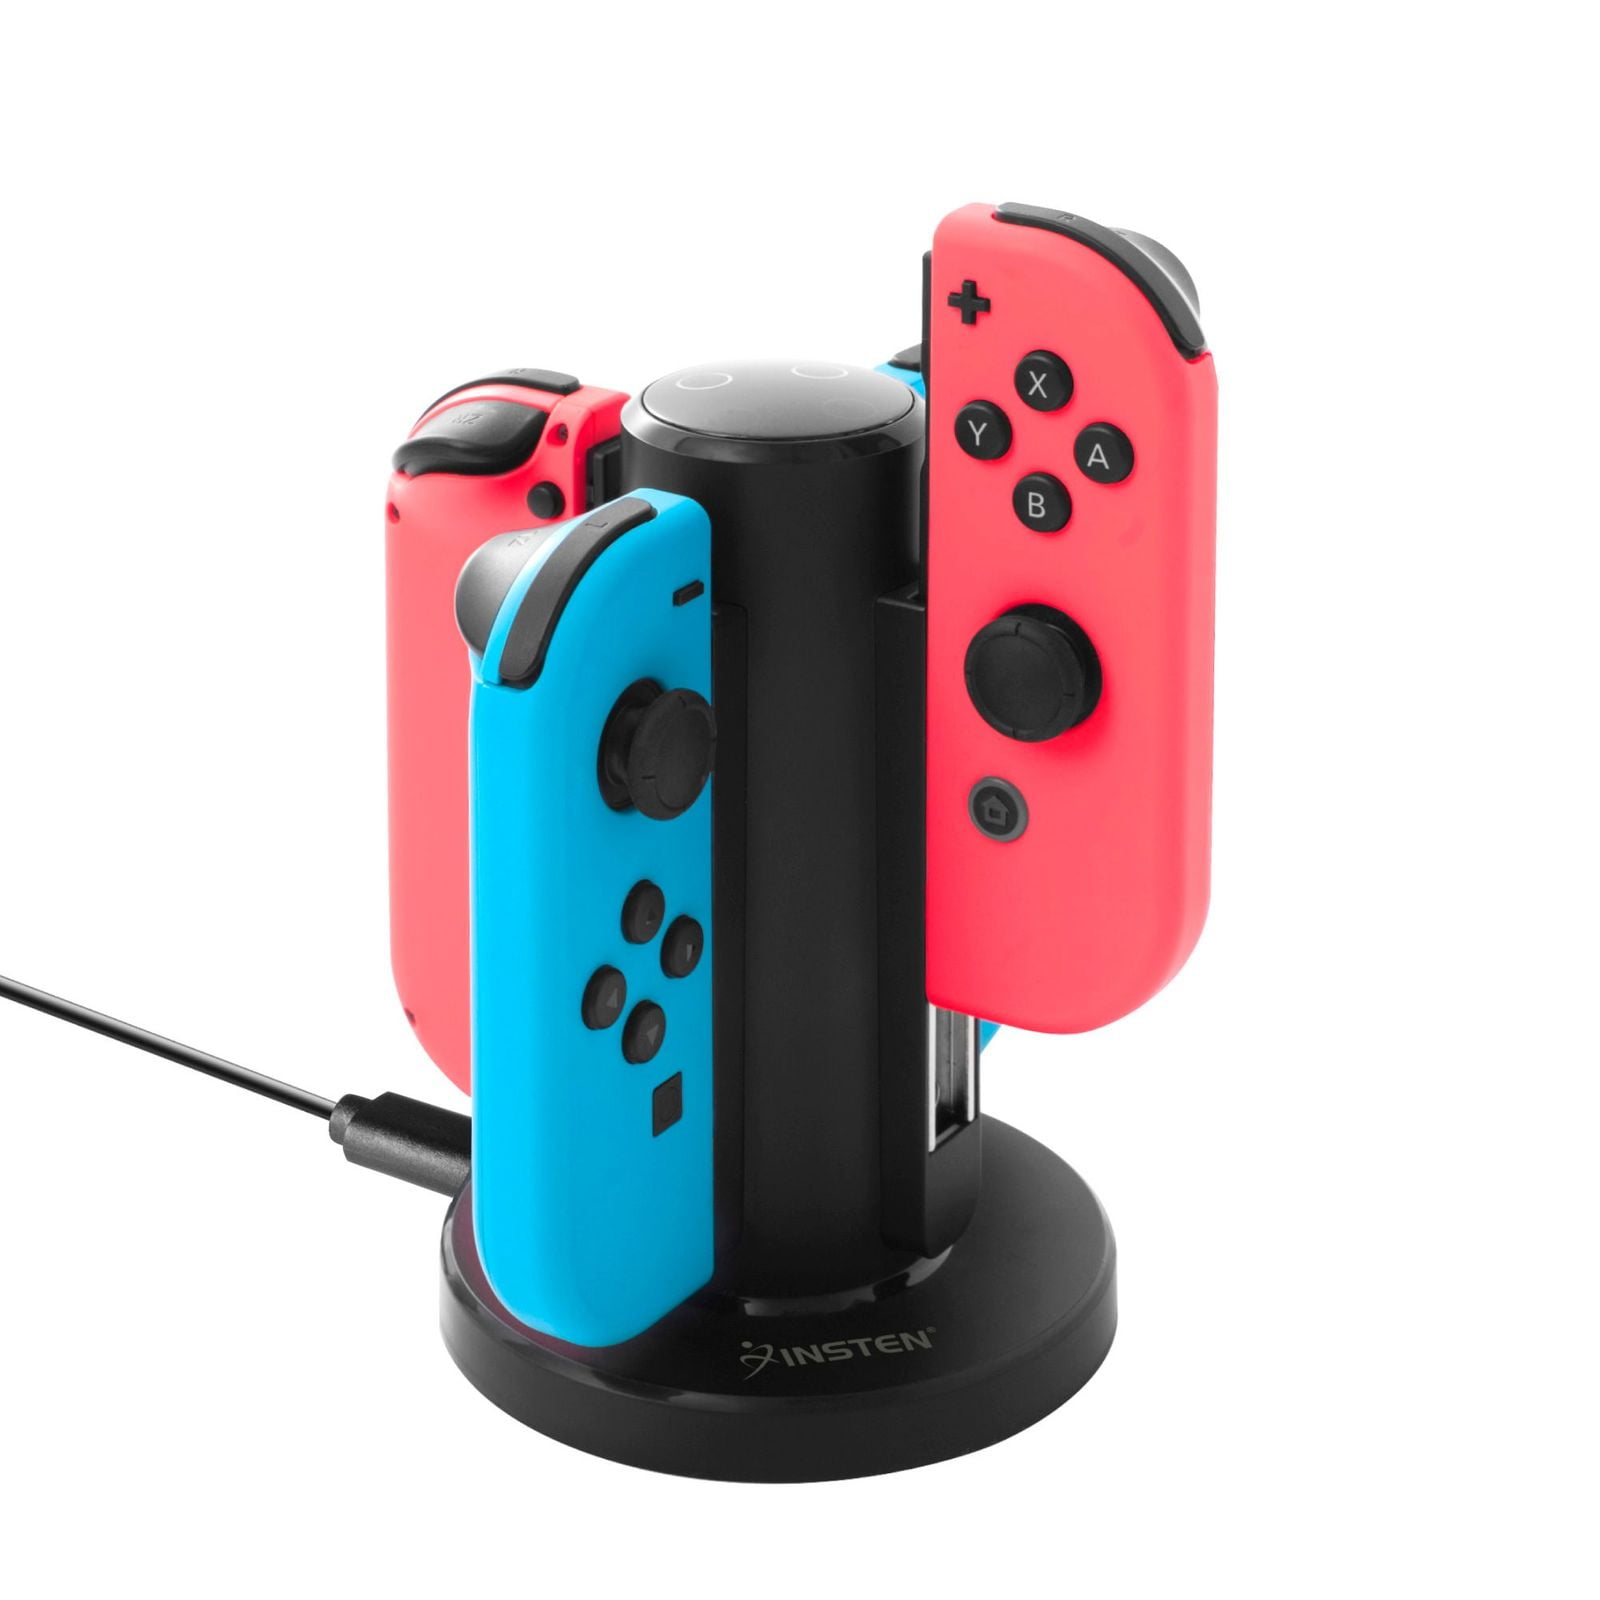 Insten 4 in 1 Con Controller Charger Docking Stand For Nintendo Switch OLED Charging Dock Joycon with LED indication & USB Cable - Walmart.com